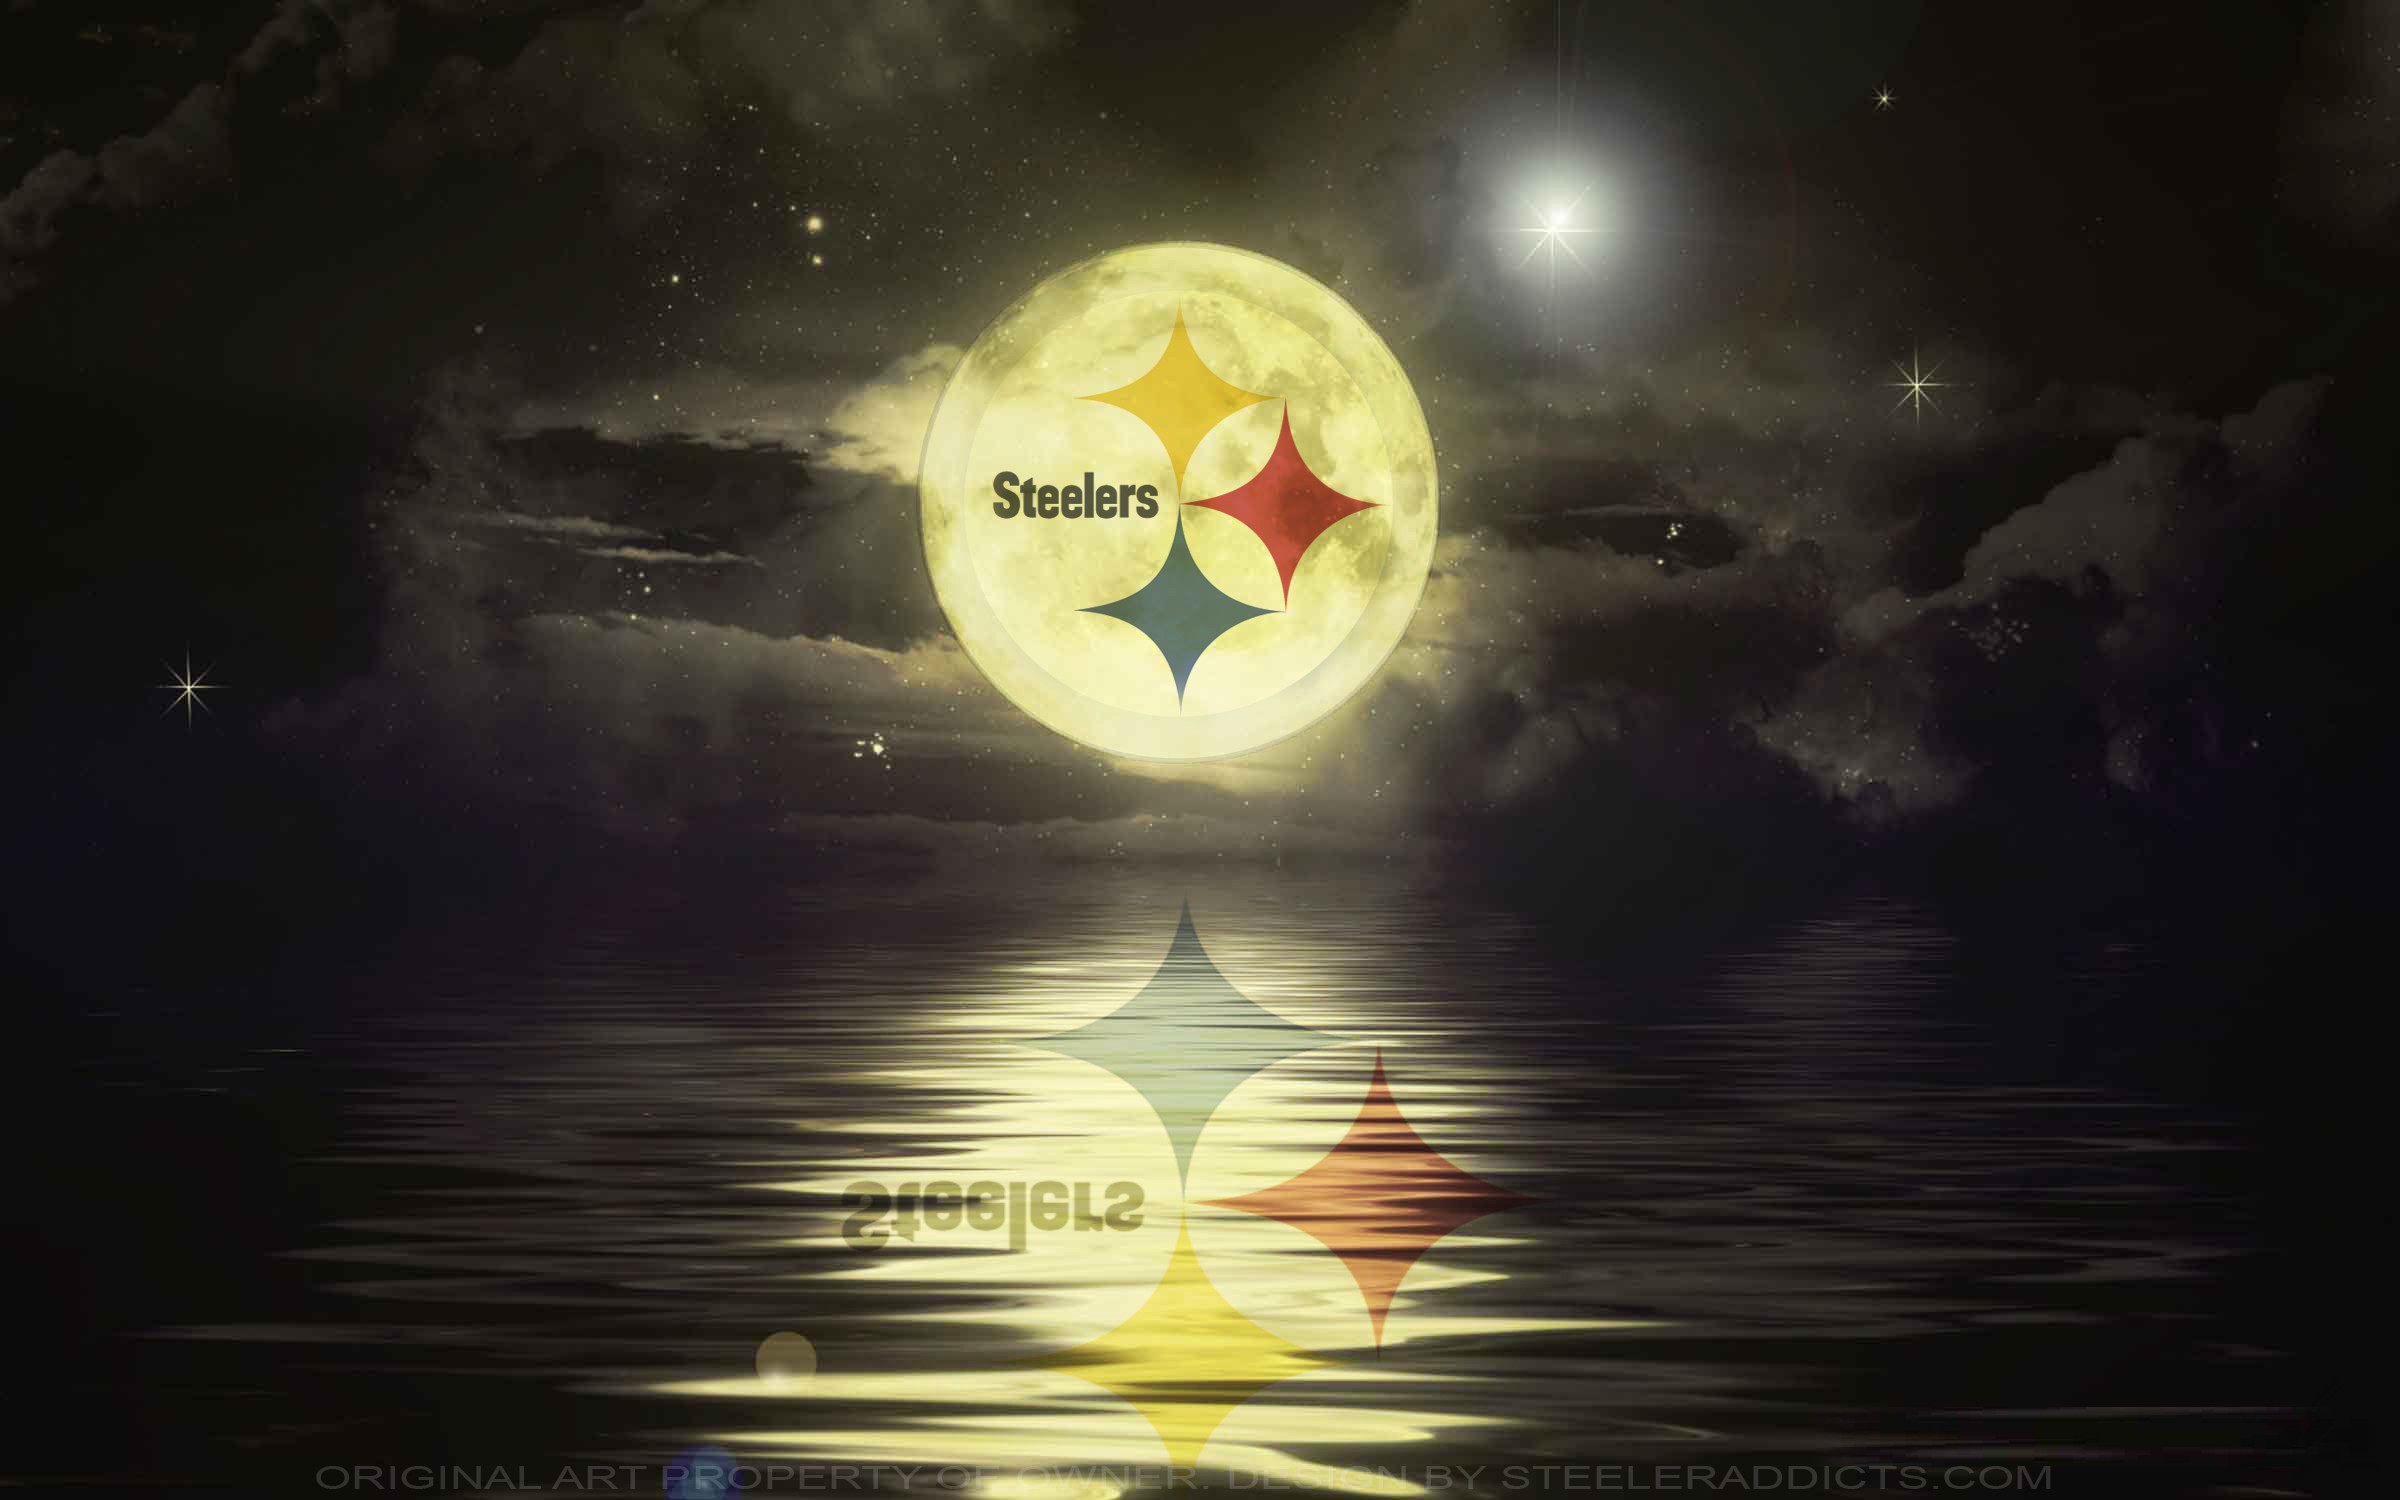 Pittsburgh Steelers wallpaper ·① Download free full HD backgrounds for